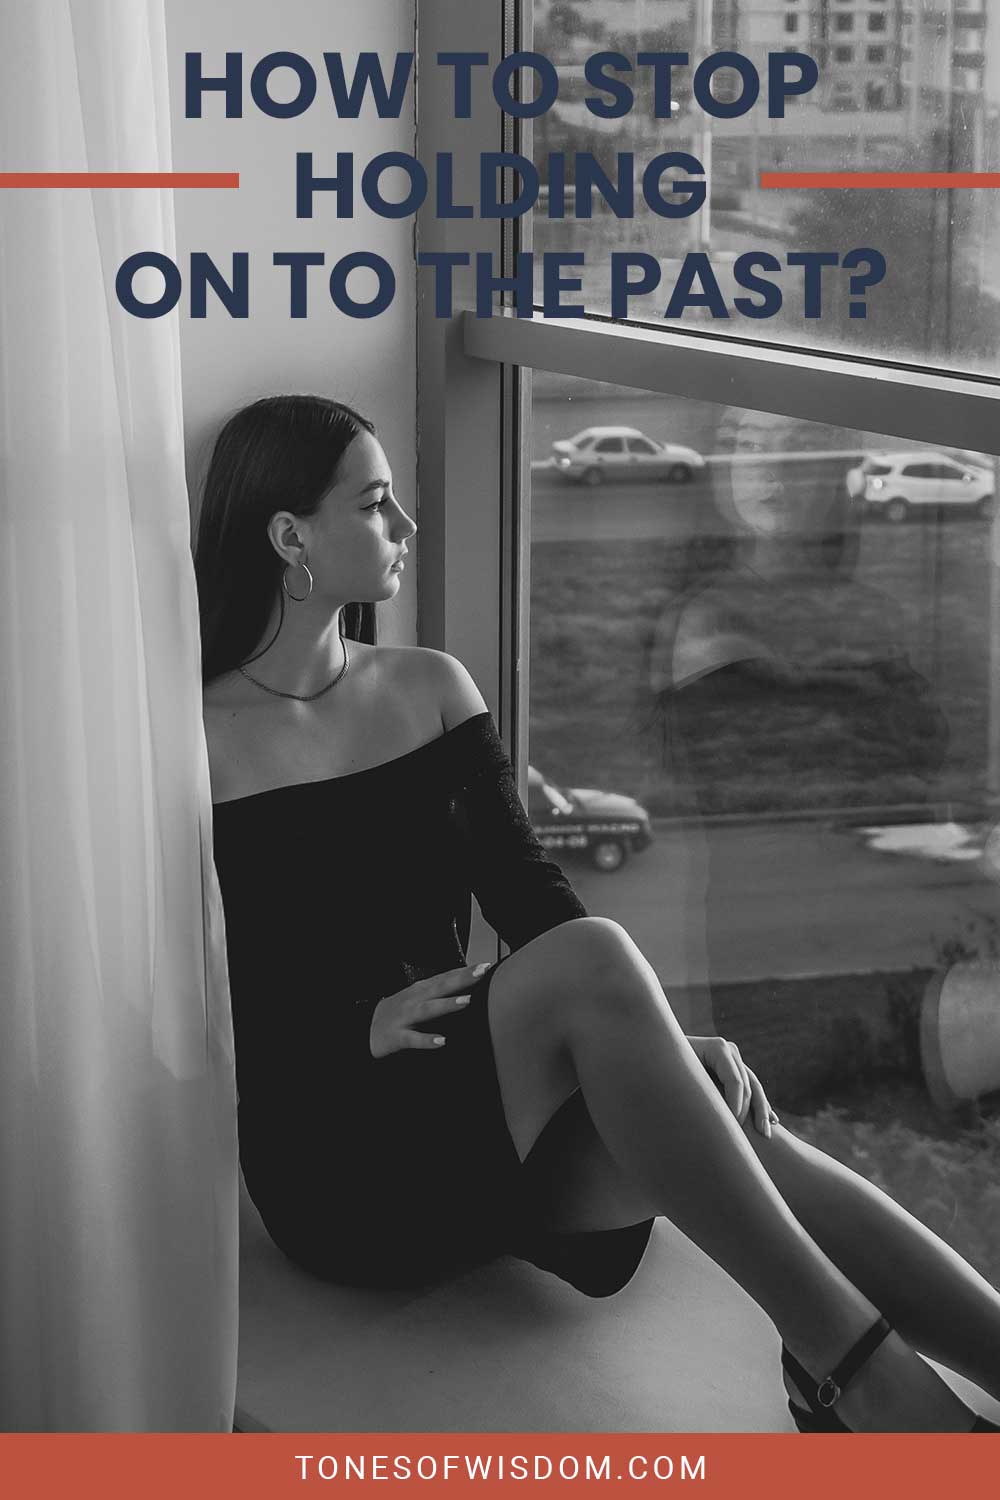 How To Stop Holding On To The Past?